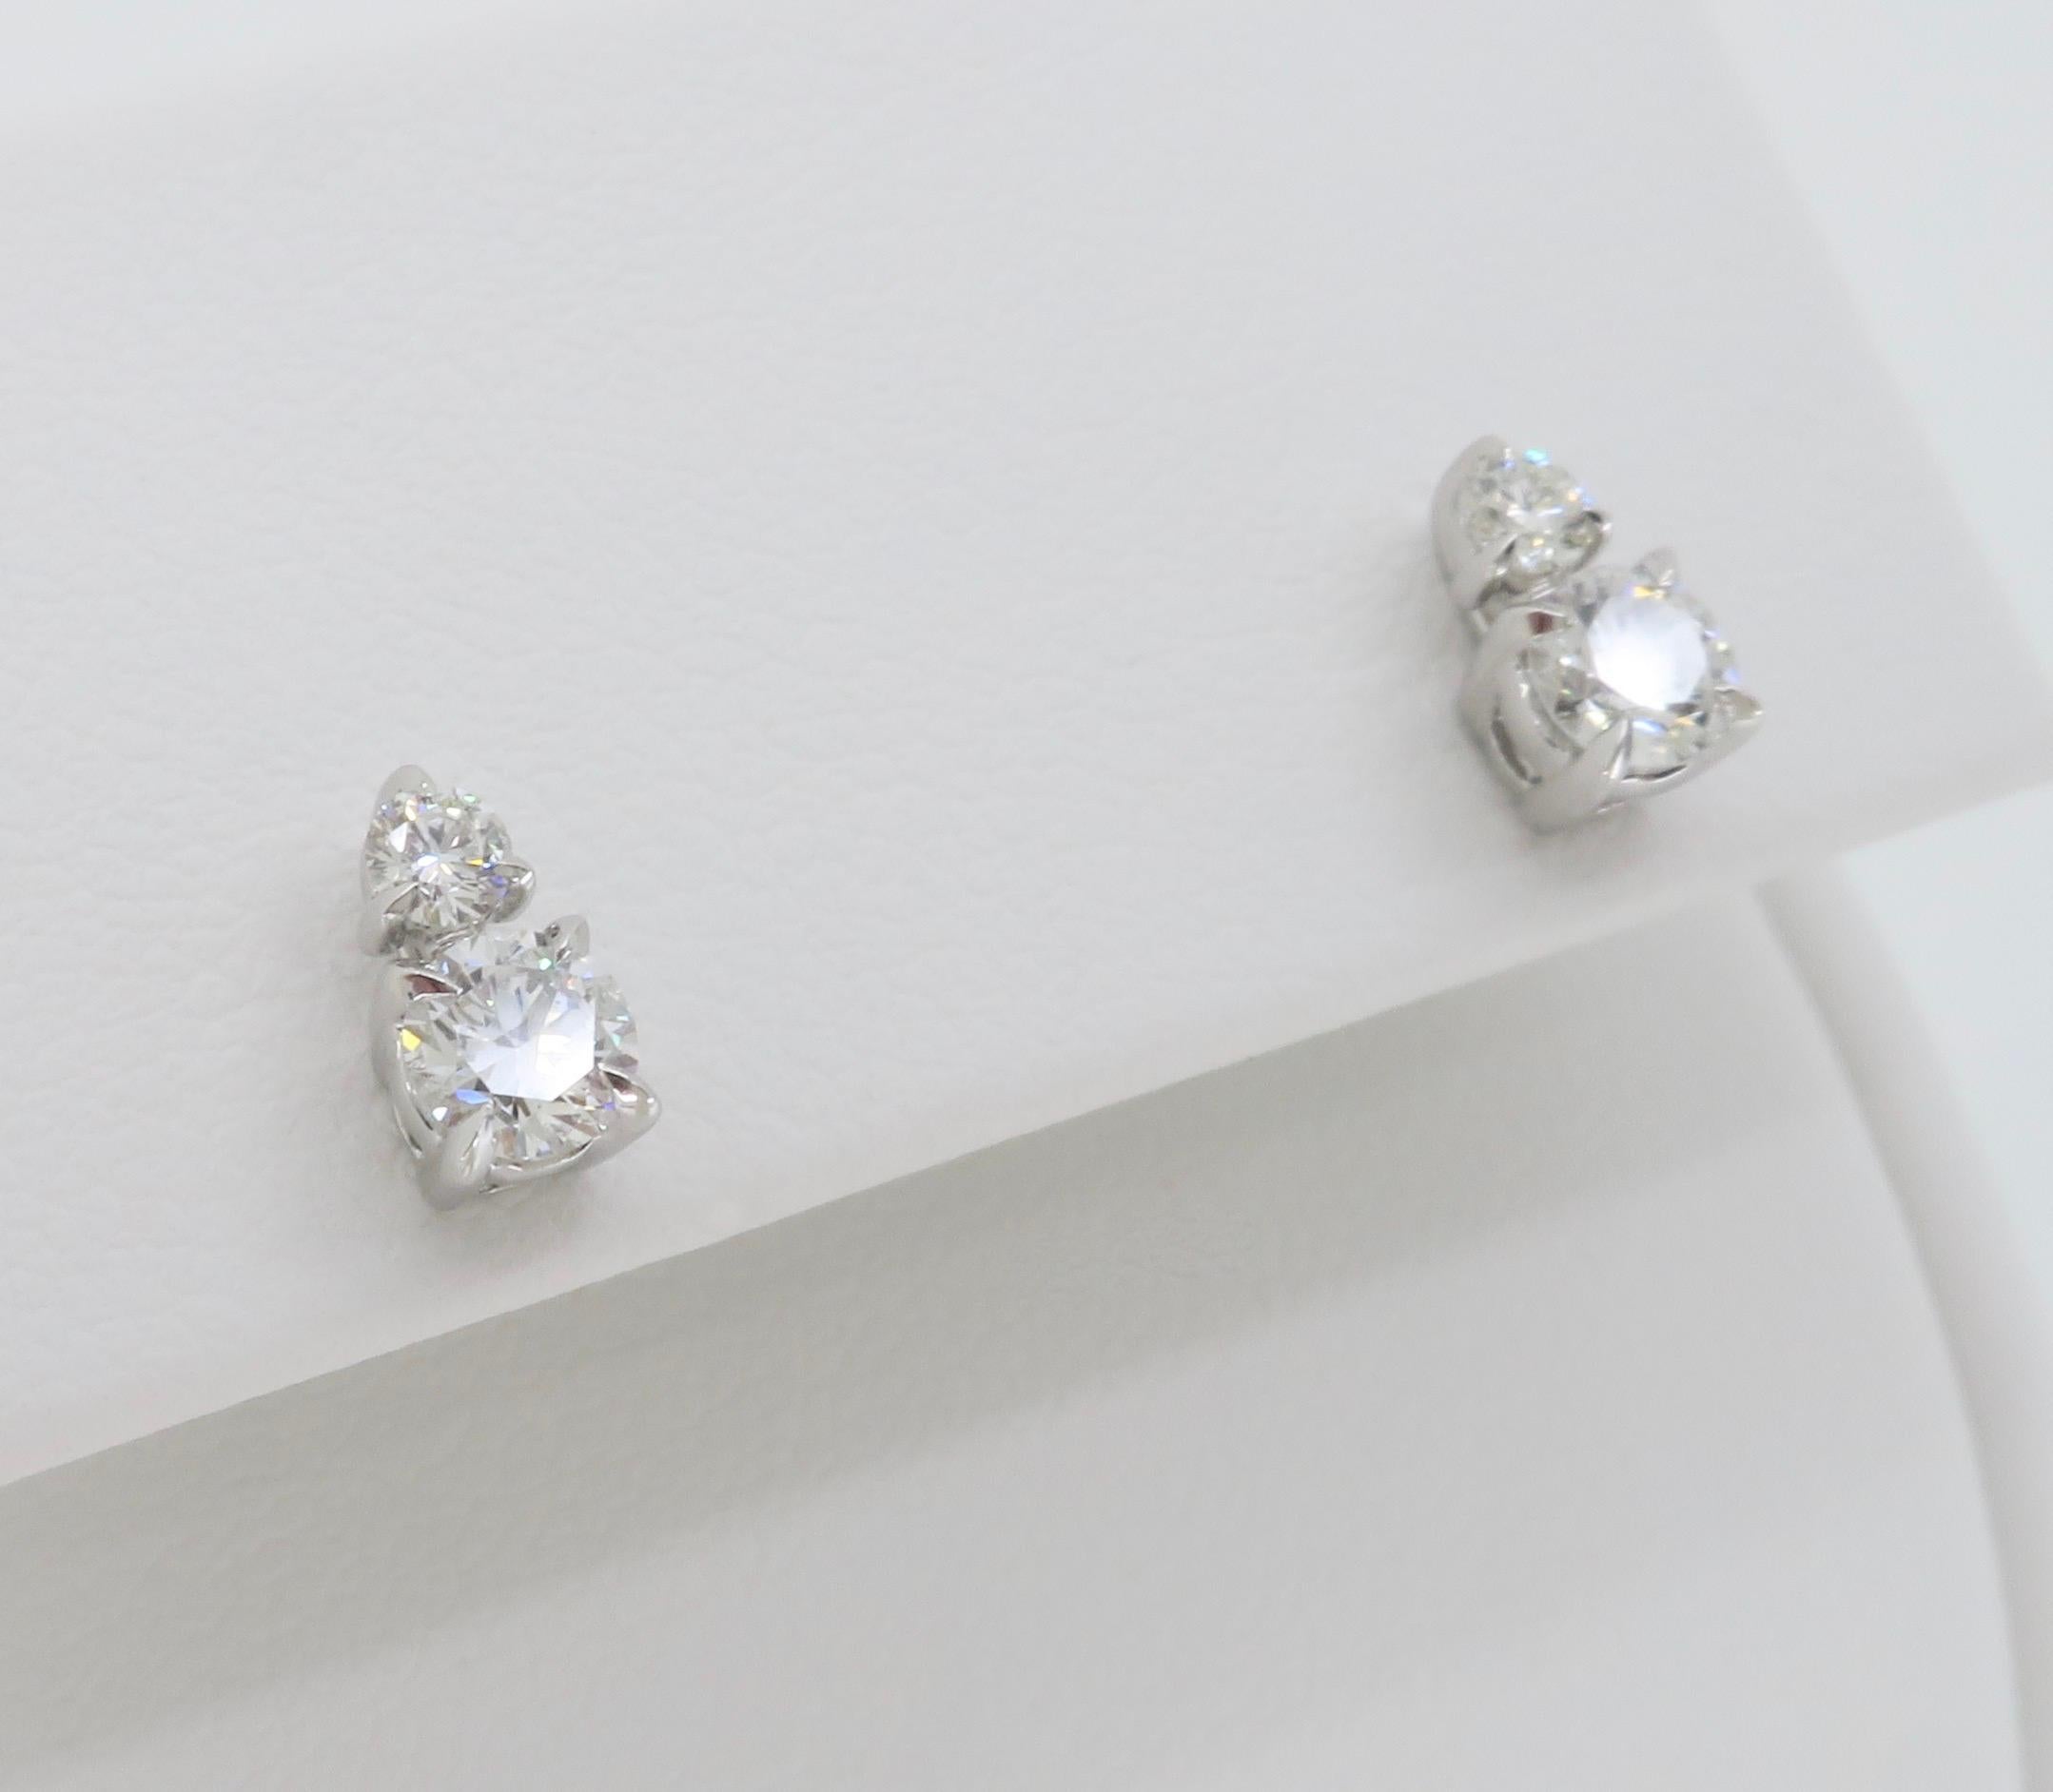 Chic pair of double diamond stud earrings made in 14k white gold that can be worn two ways. 

Diamond Cut: Round Brilliant
Average Diamond Color: E-F
Average Diamond Clarity:  VS
Diamond Carat Weight: .50CTW 
Metal: 14K White Gold
Marked/Tested: